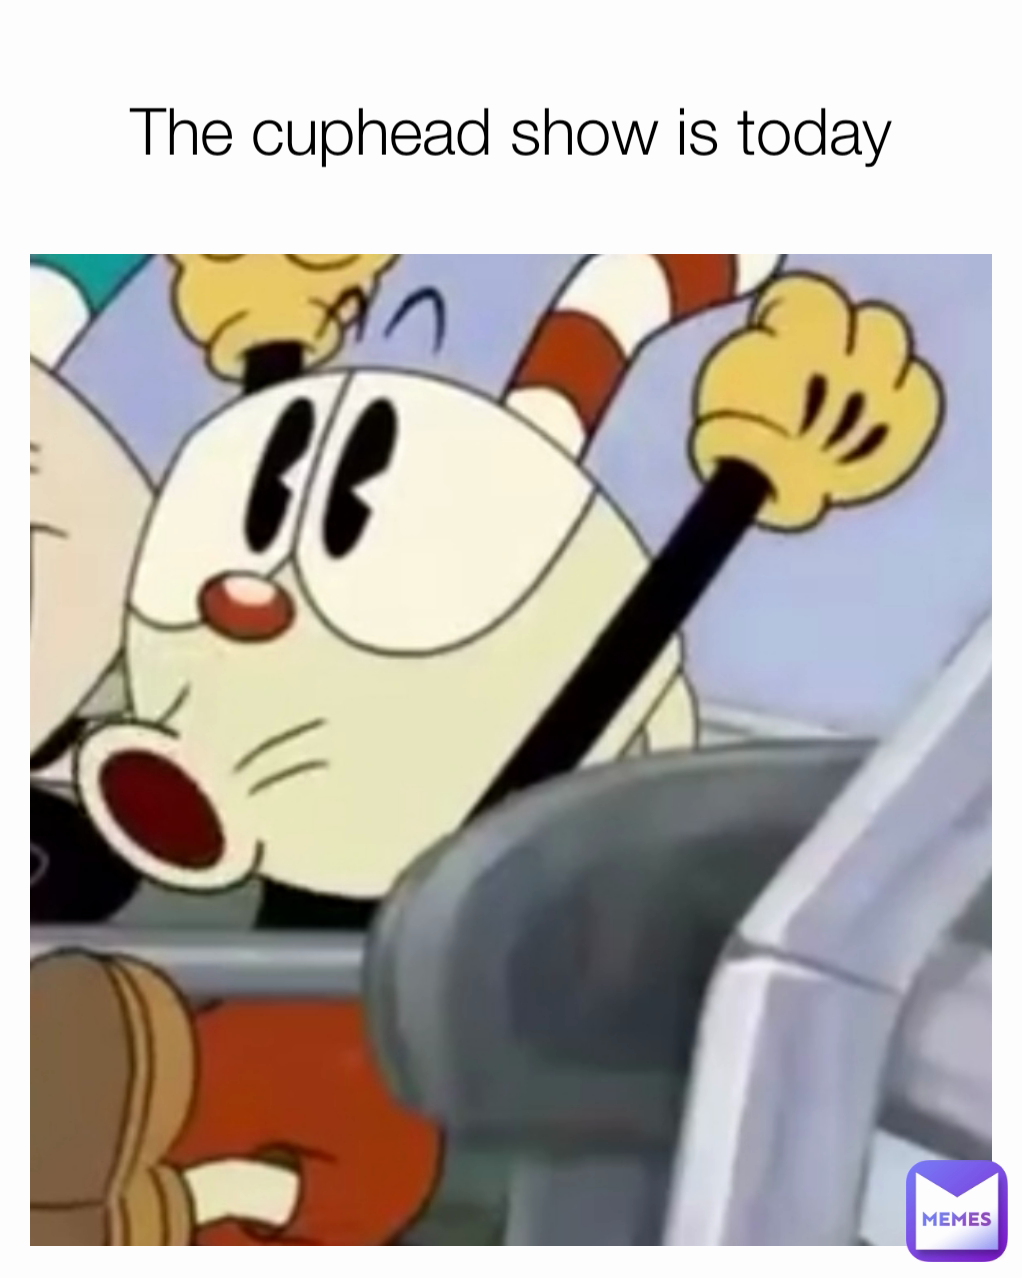 The cuphead show is today